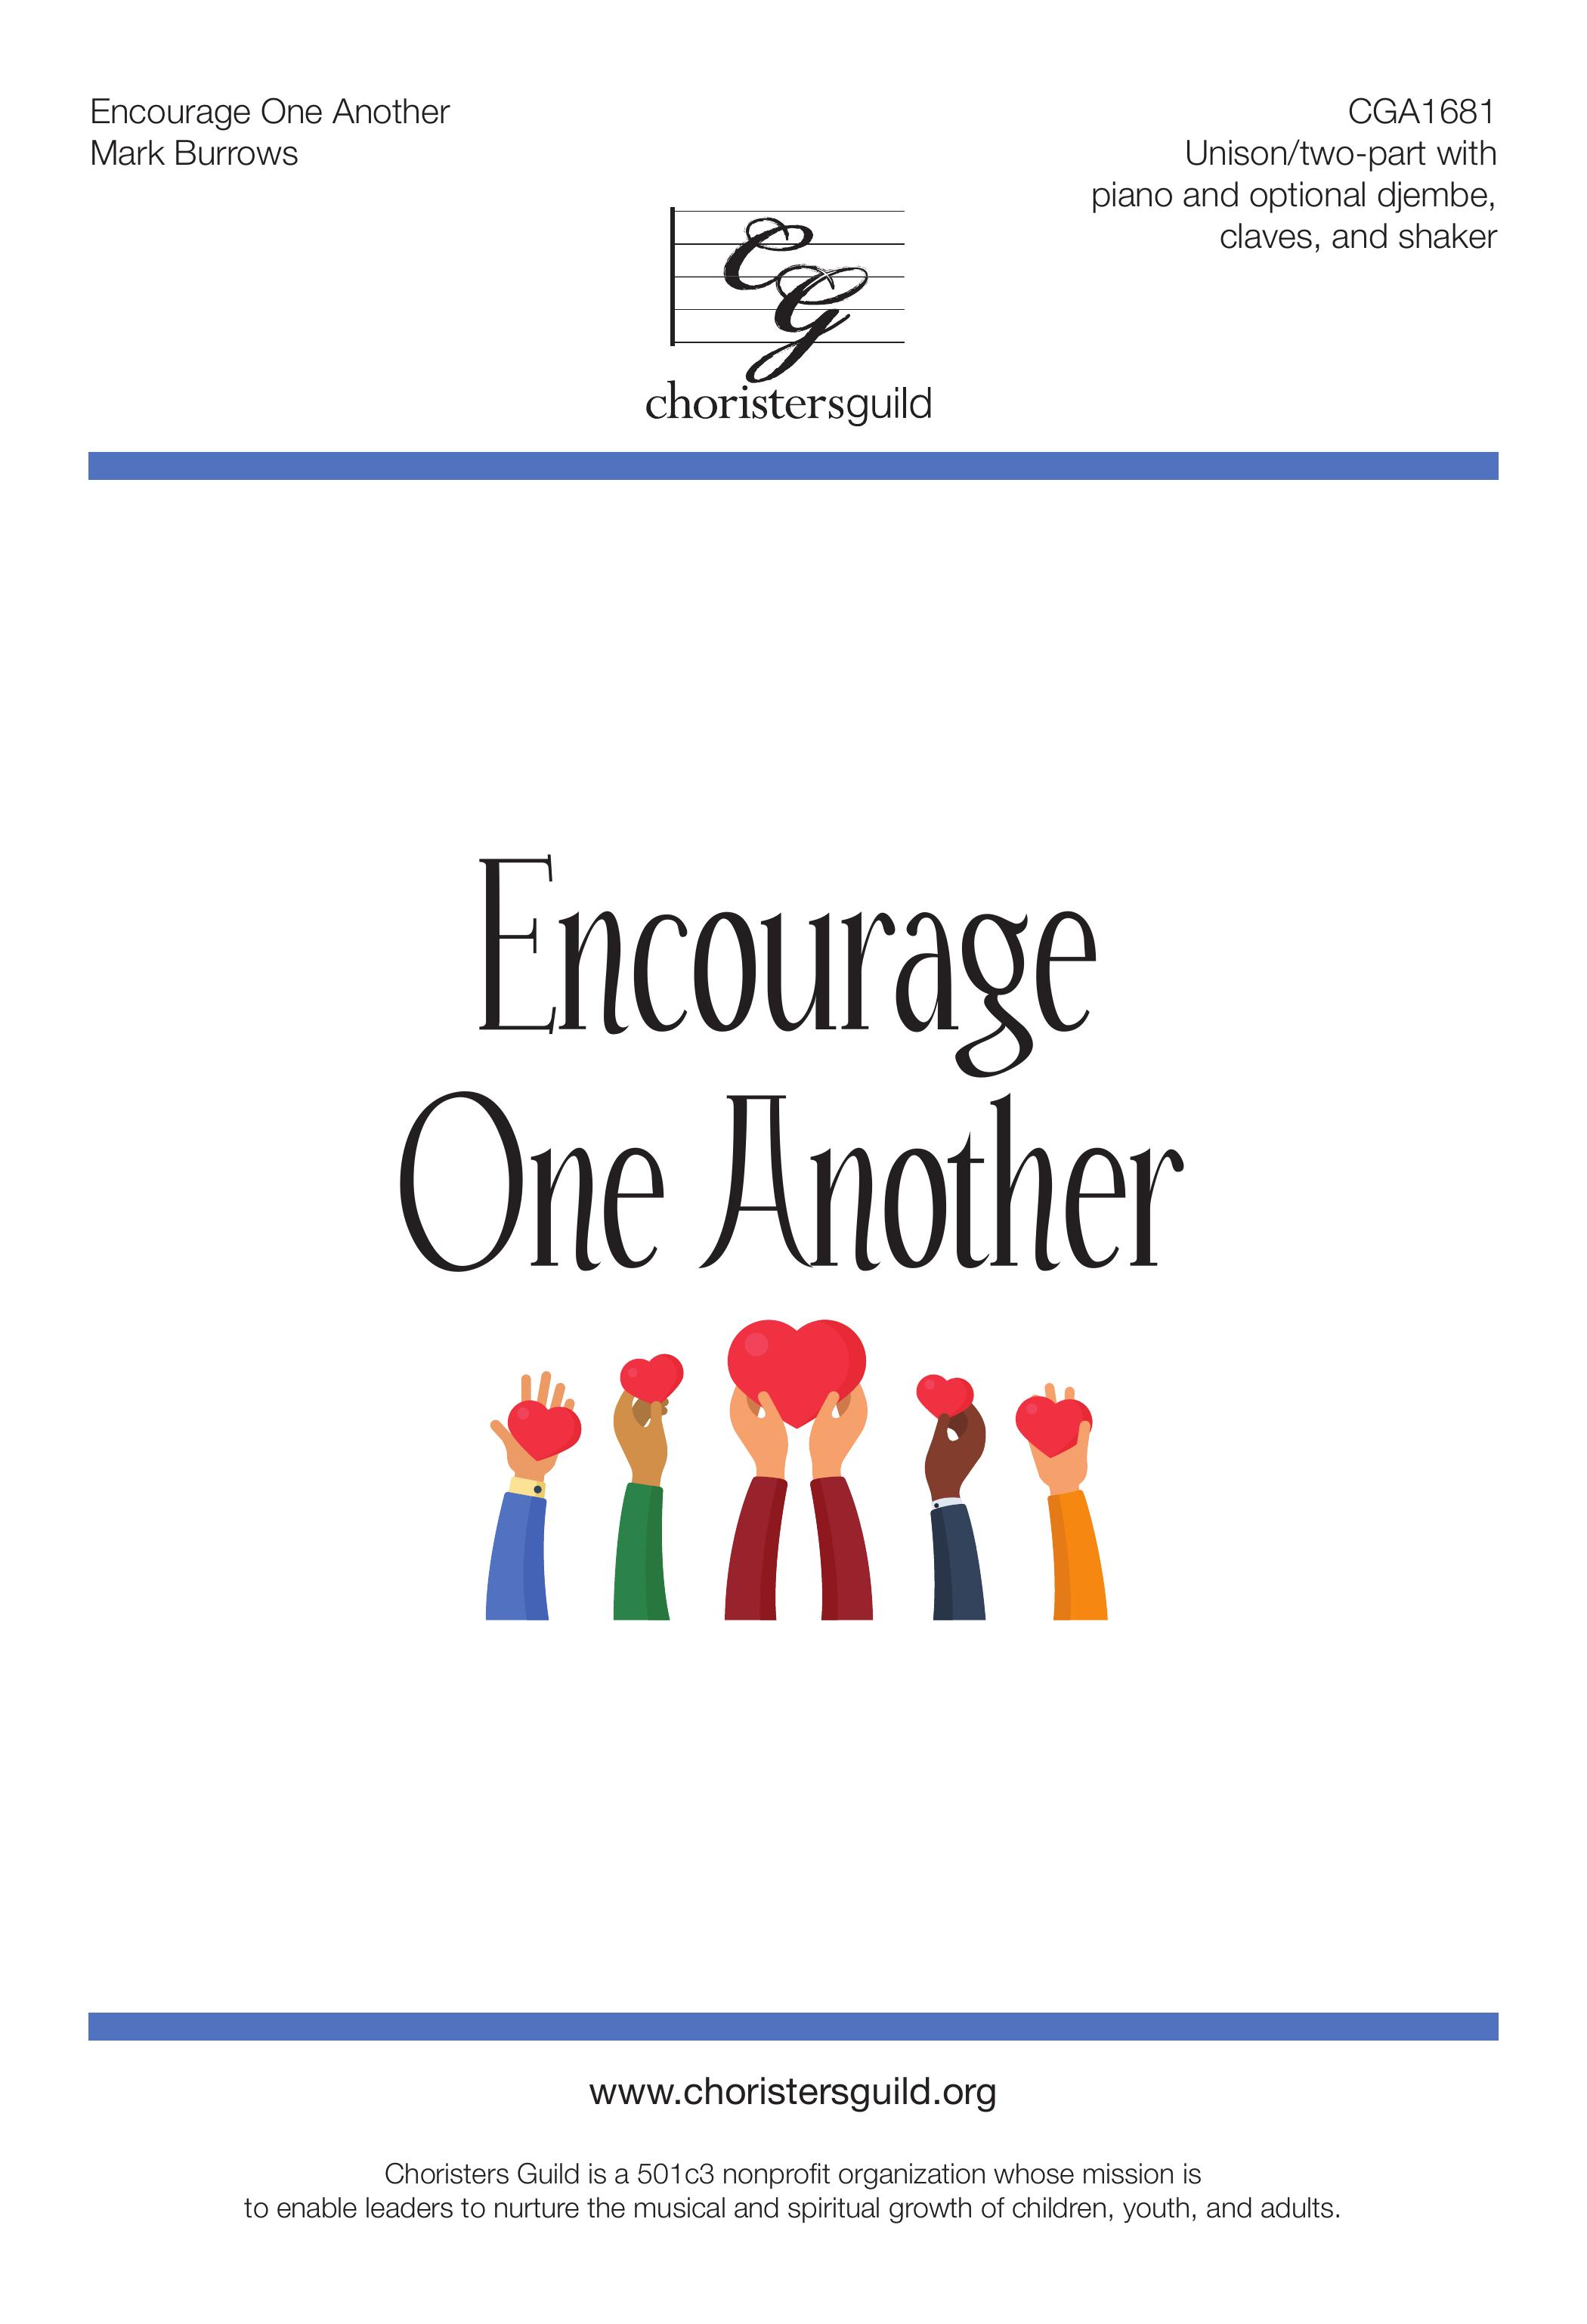 Encourage One Another - Reproducible Instrumental Parts